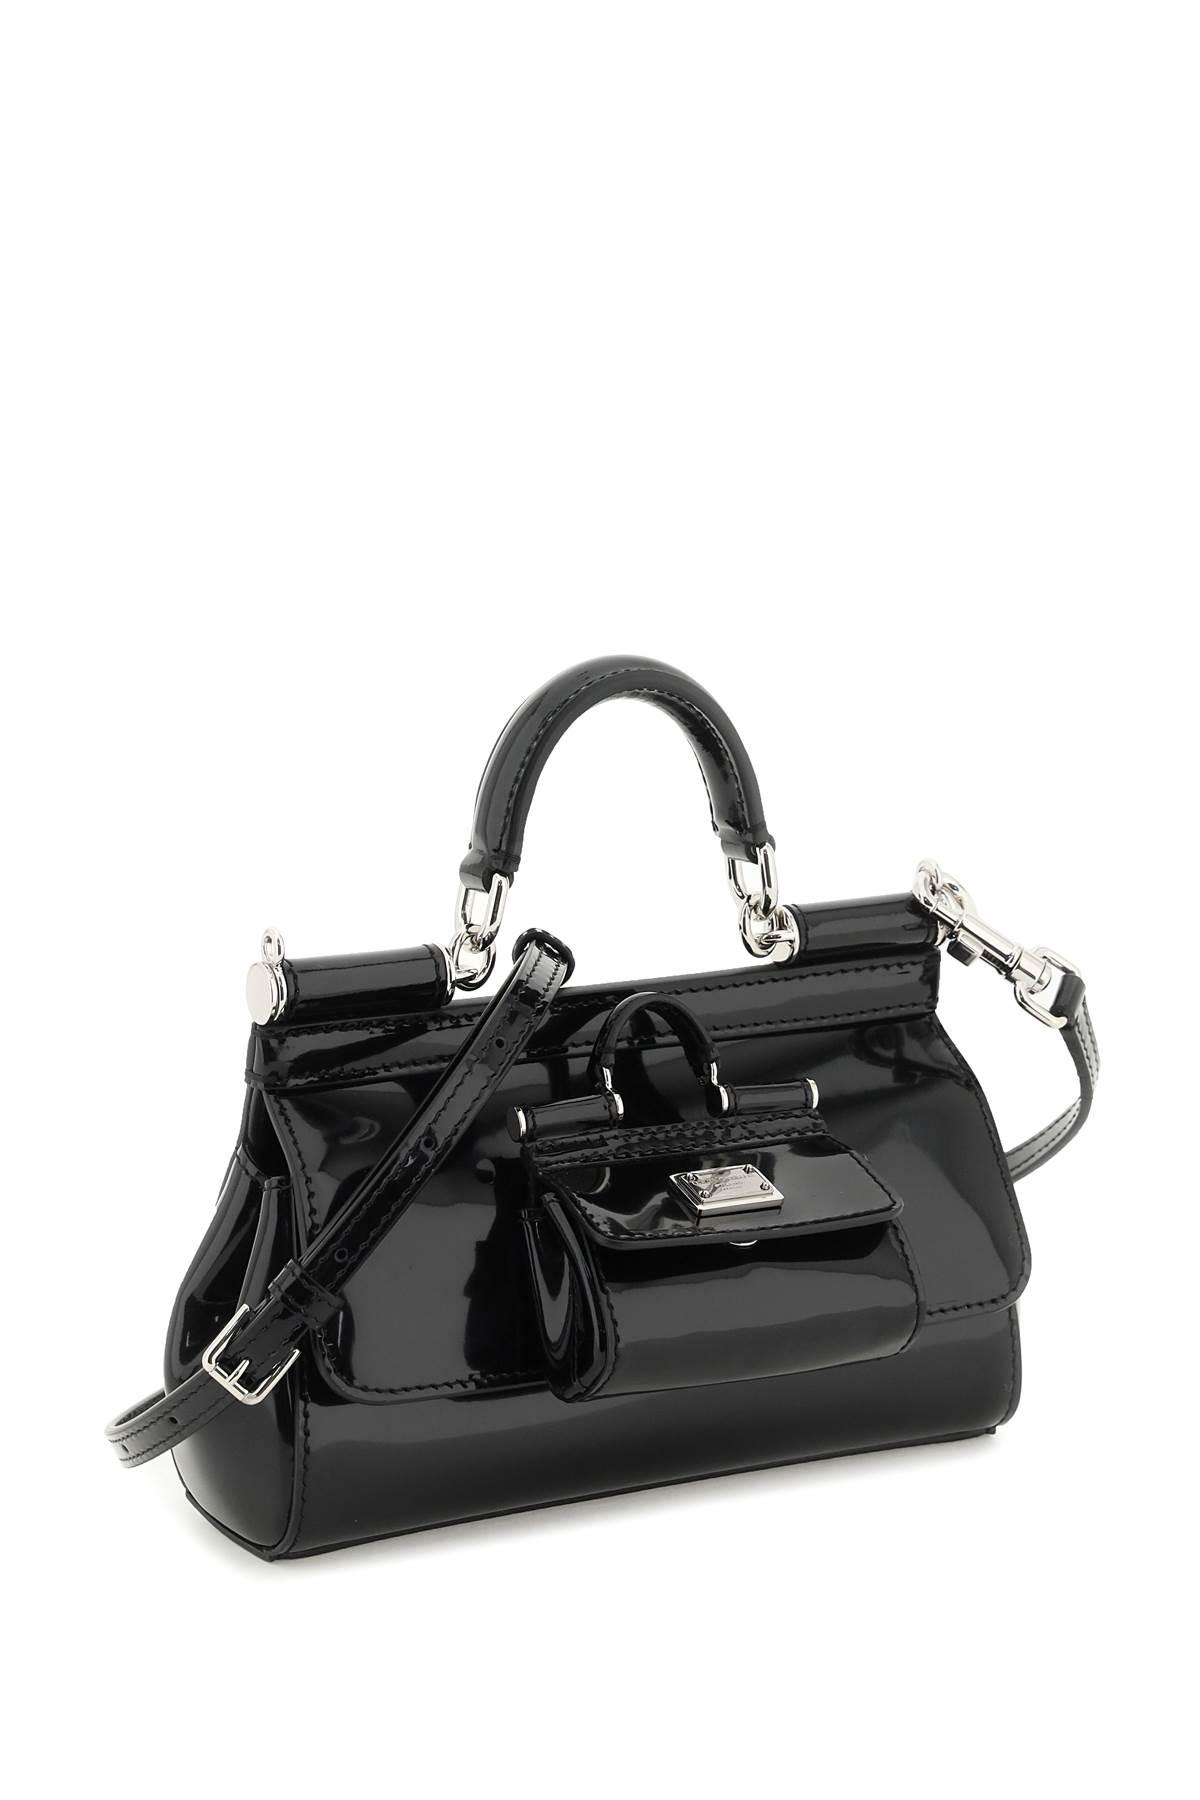 DOLCE & GABBANA: Sicily bag in patent leather - Gnawed Blue